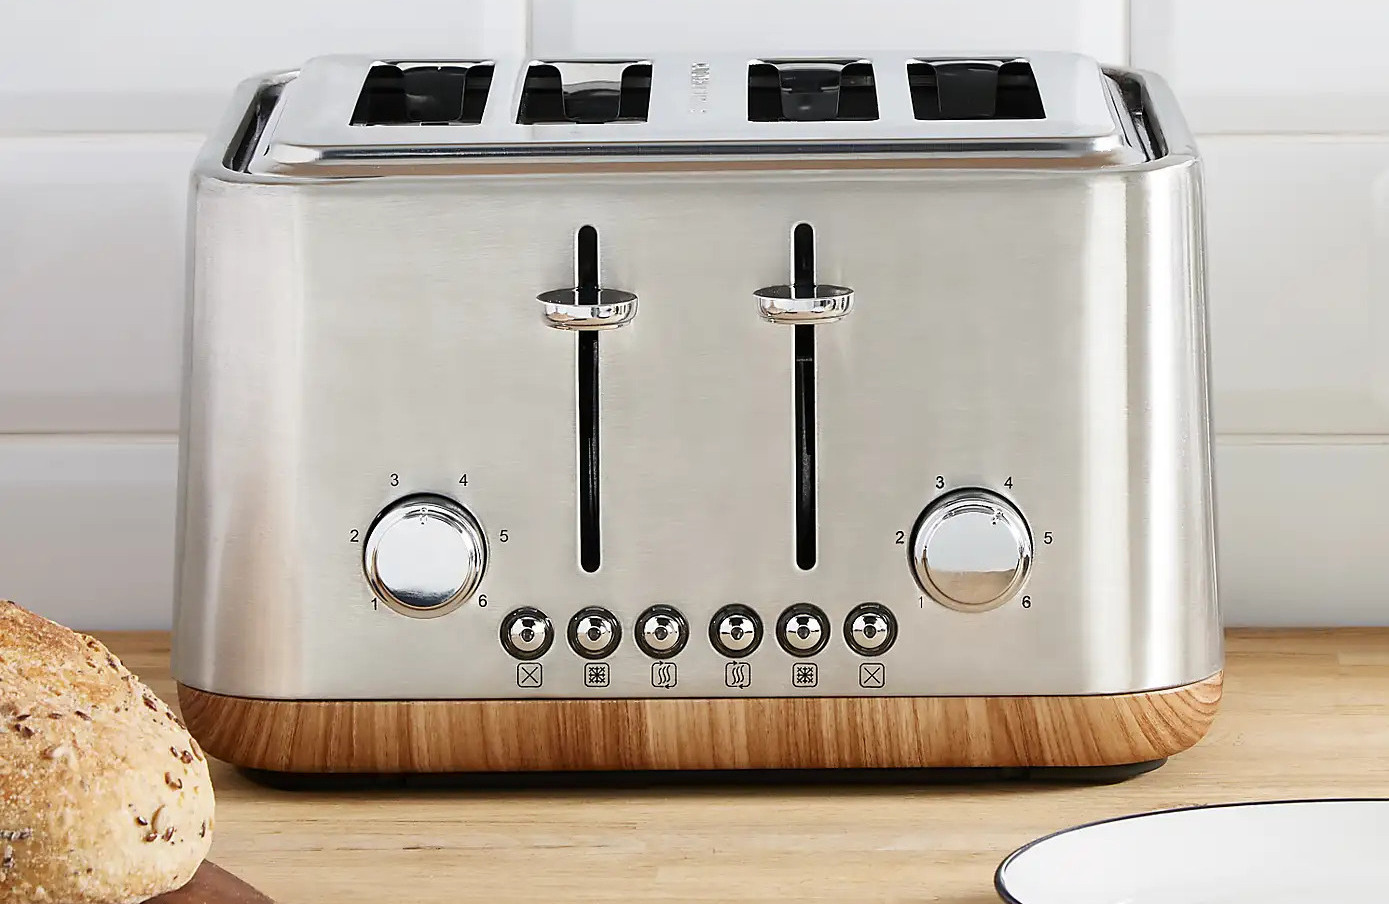 prepAmeal 4 Slice Toaster Stainless Steel Toaster Two Slice Bagel Toaster Small Bake Toaster with 6 Browning Setting, Reheat, Defrost, Bagel, Cancel